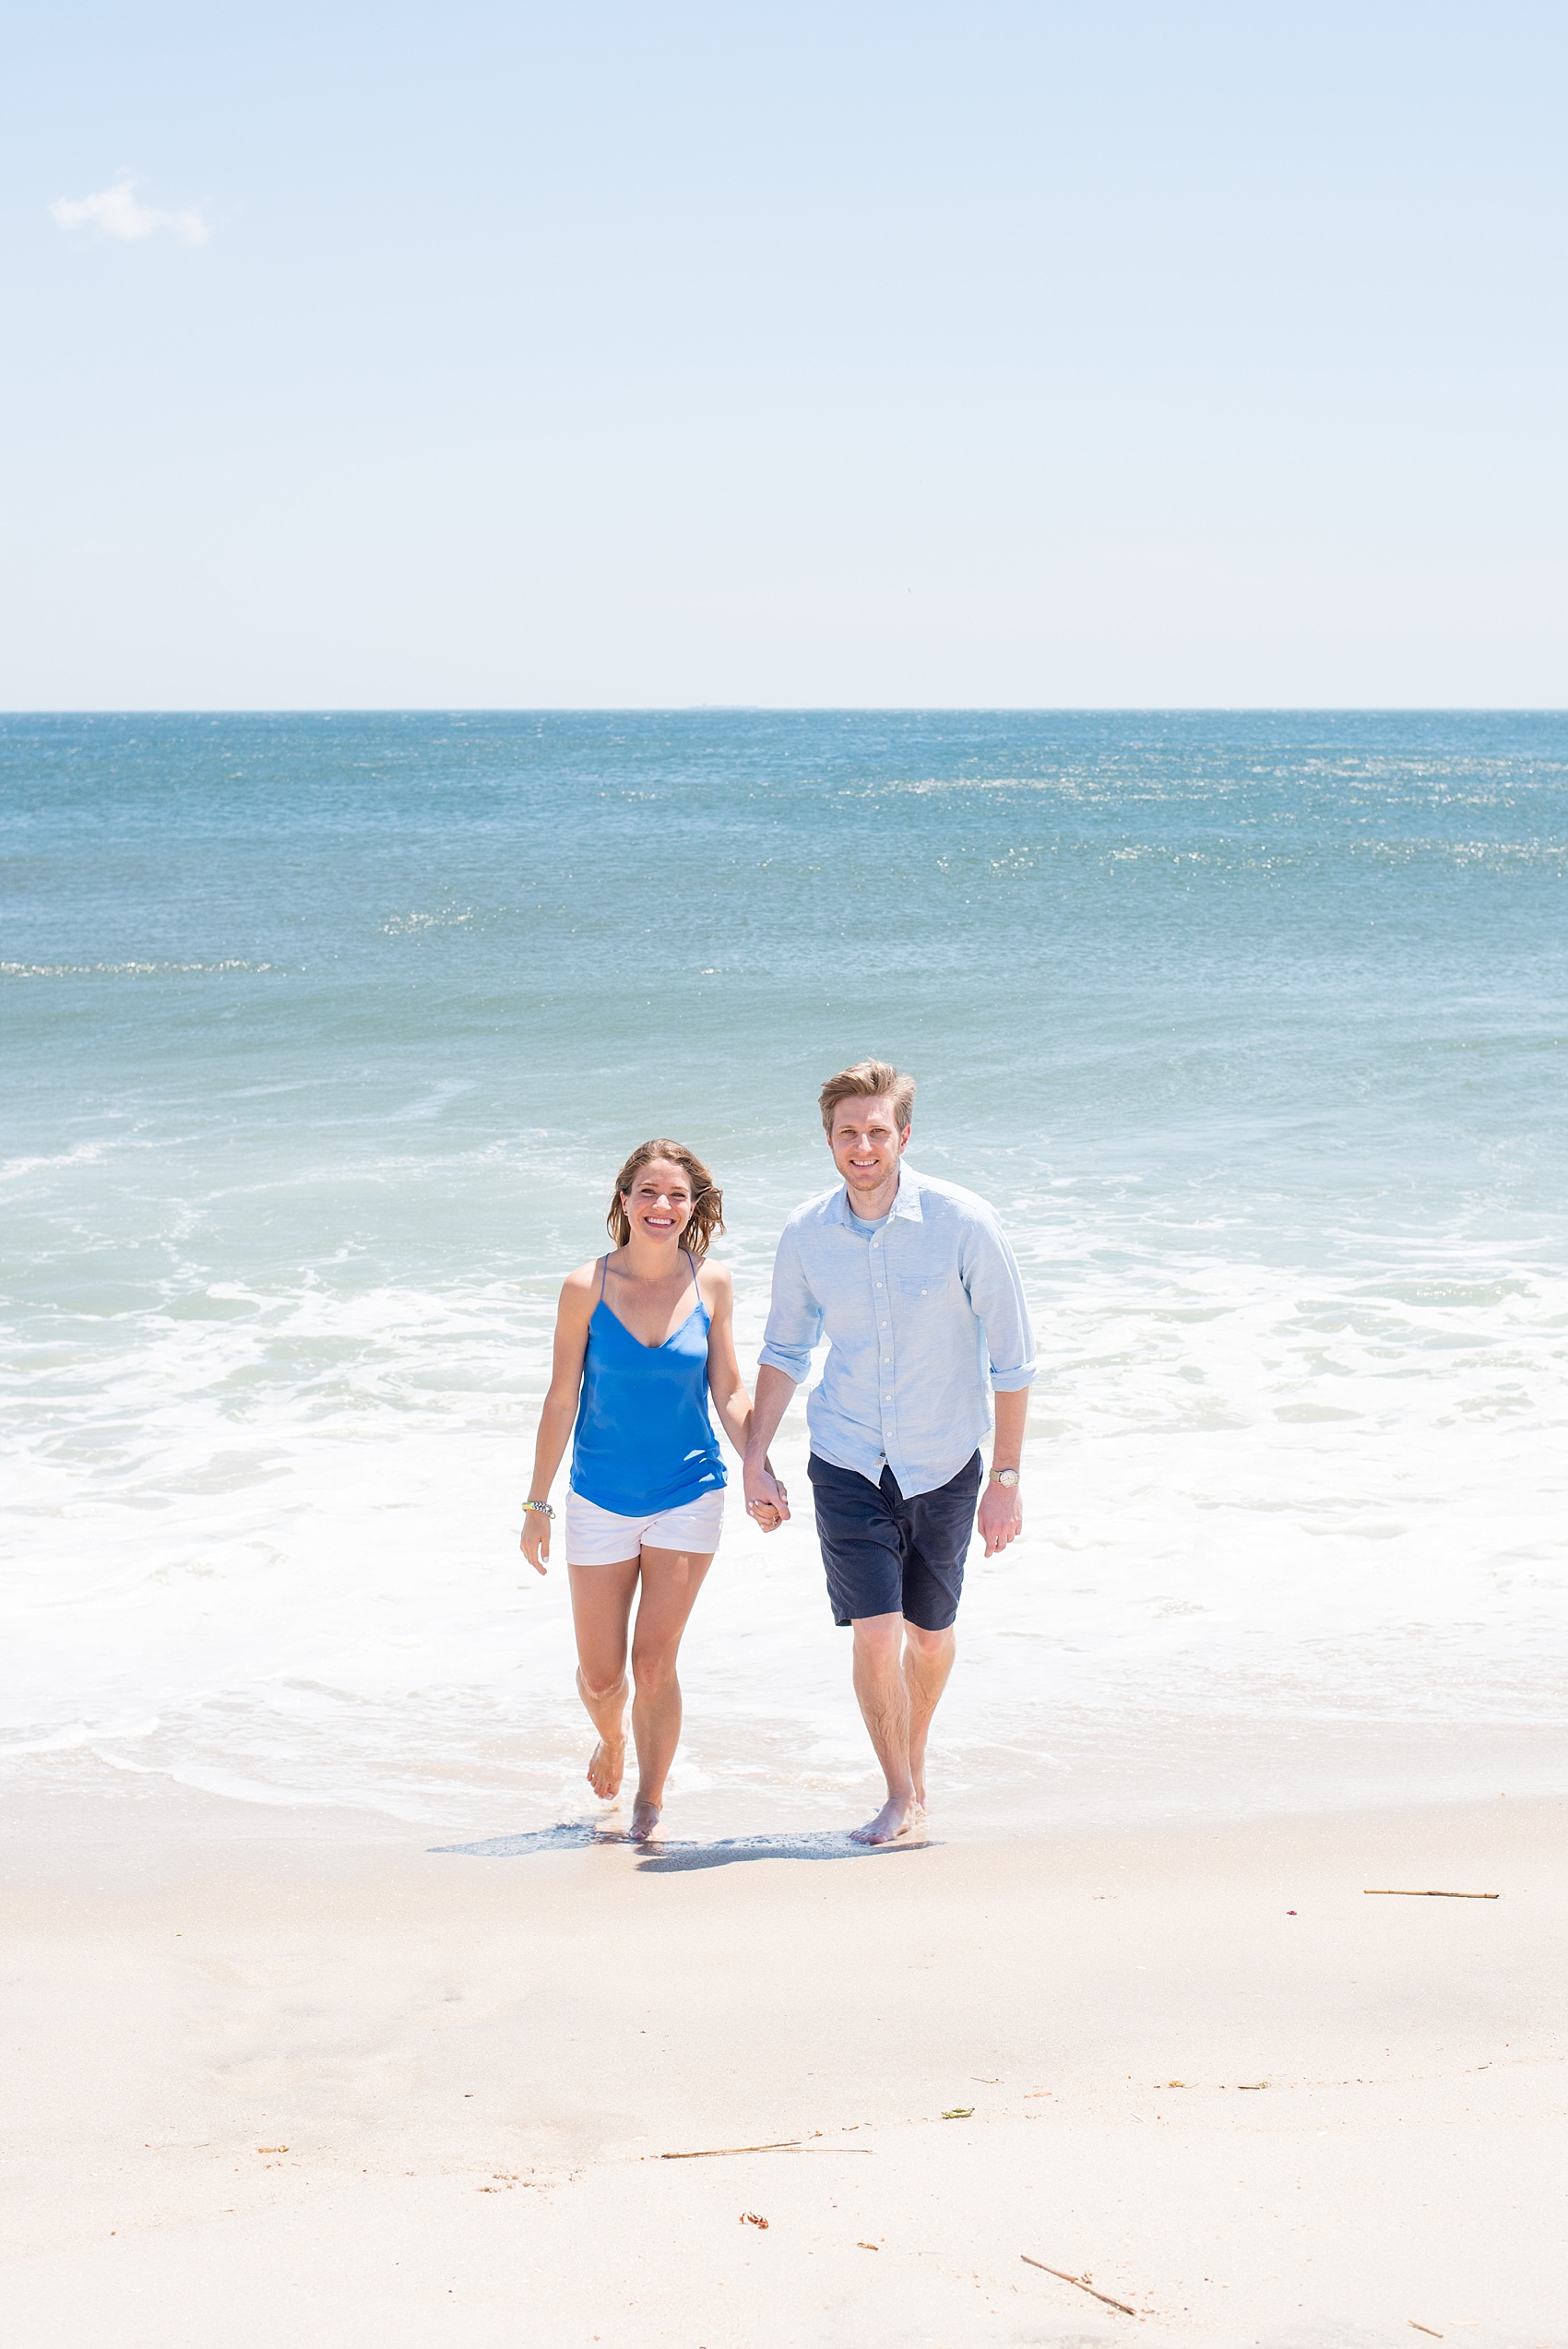 Mikkel Paige Photography captures a Bay Head, NJ engagement session on the beach with the bride in blue.